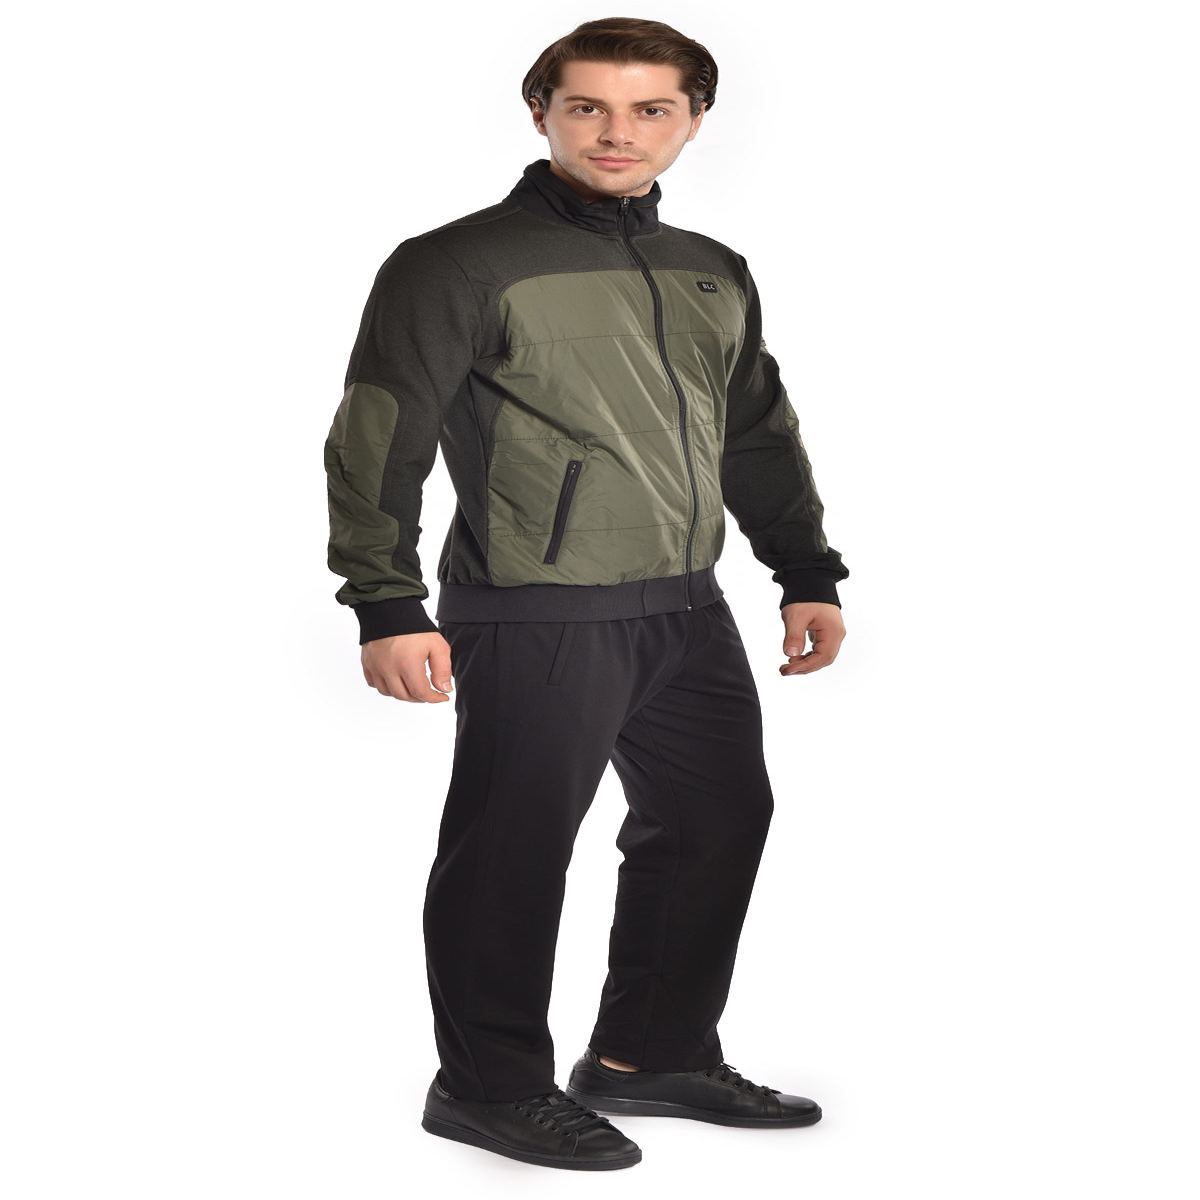 BILCEE MEN'S TRACKSUIT FOR TRANING-1801W9417-1-2192